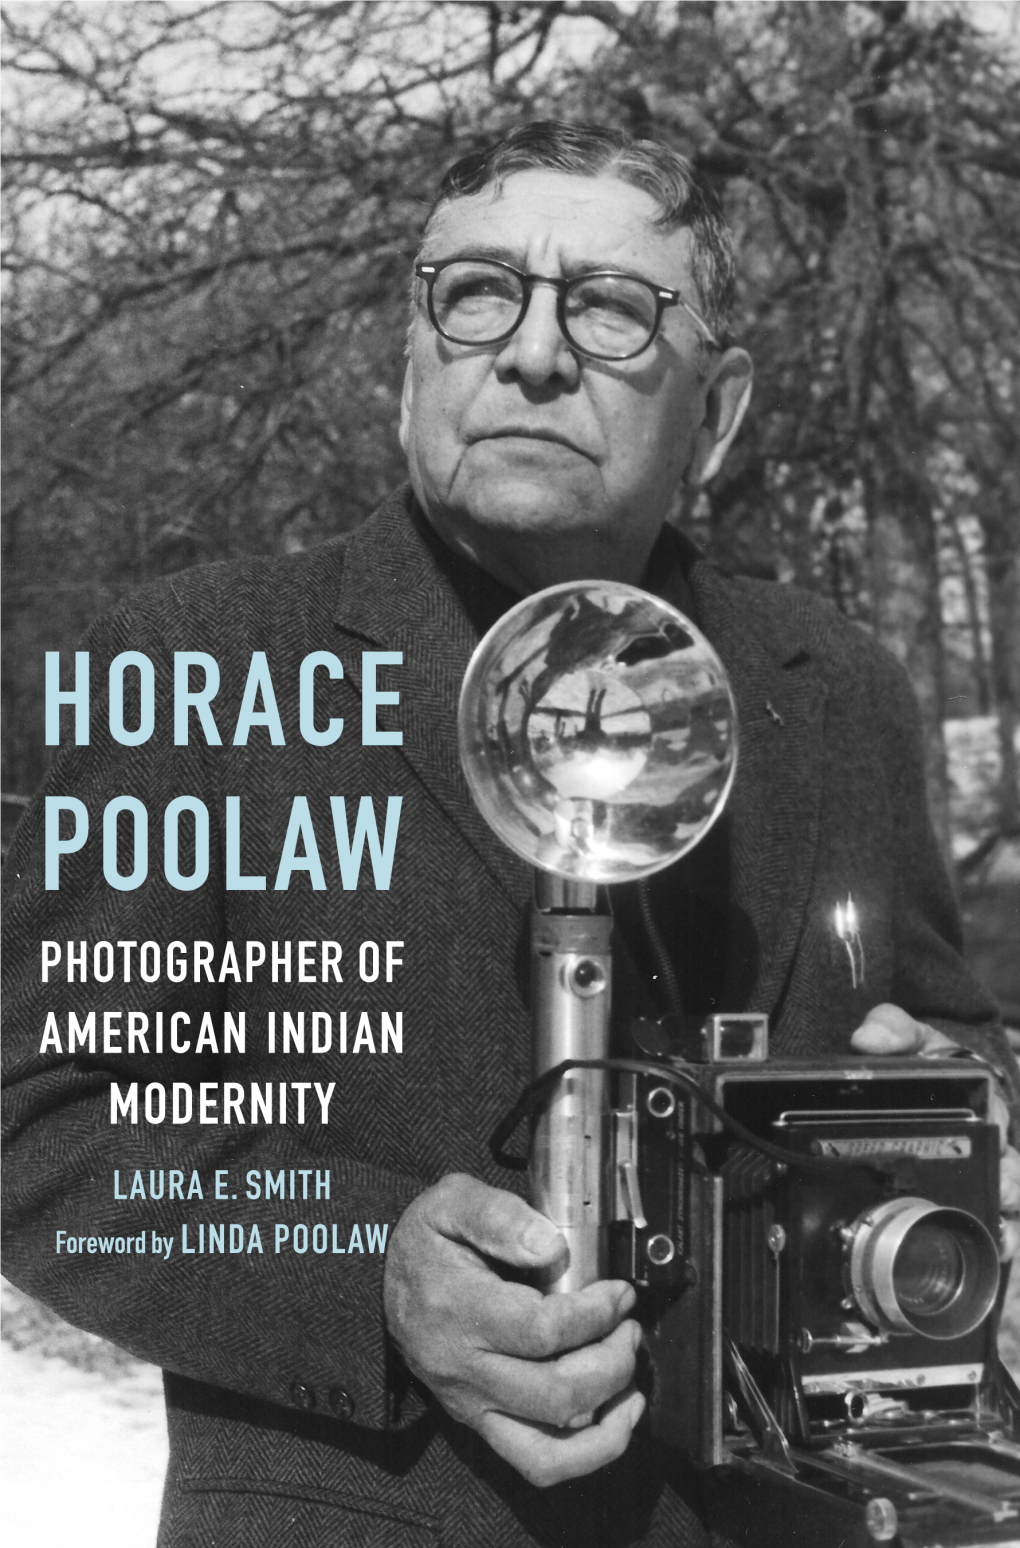 Horace Poolaw, Photographer of American Indian Modernity / Laura E